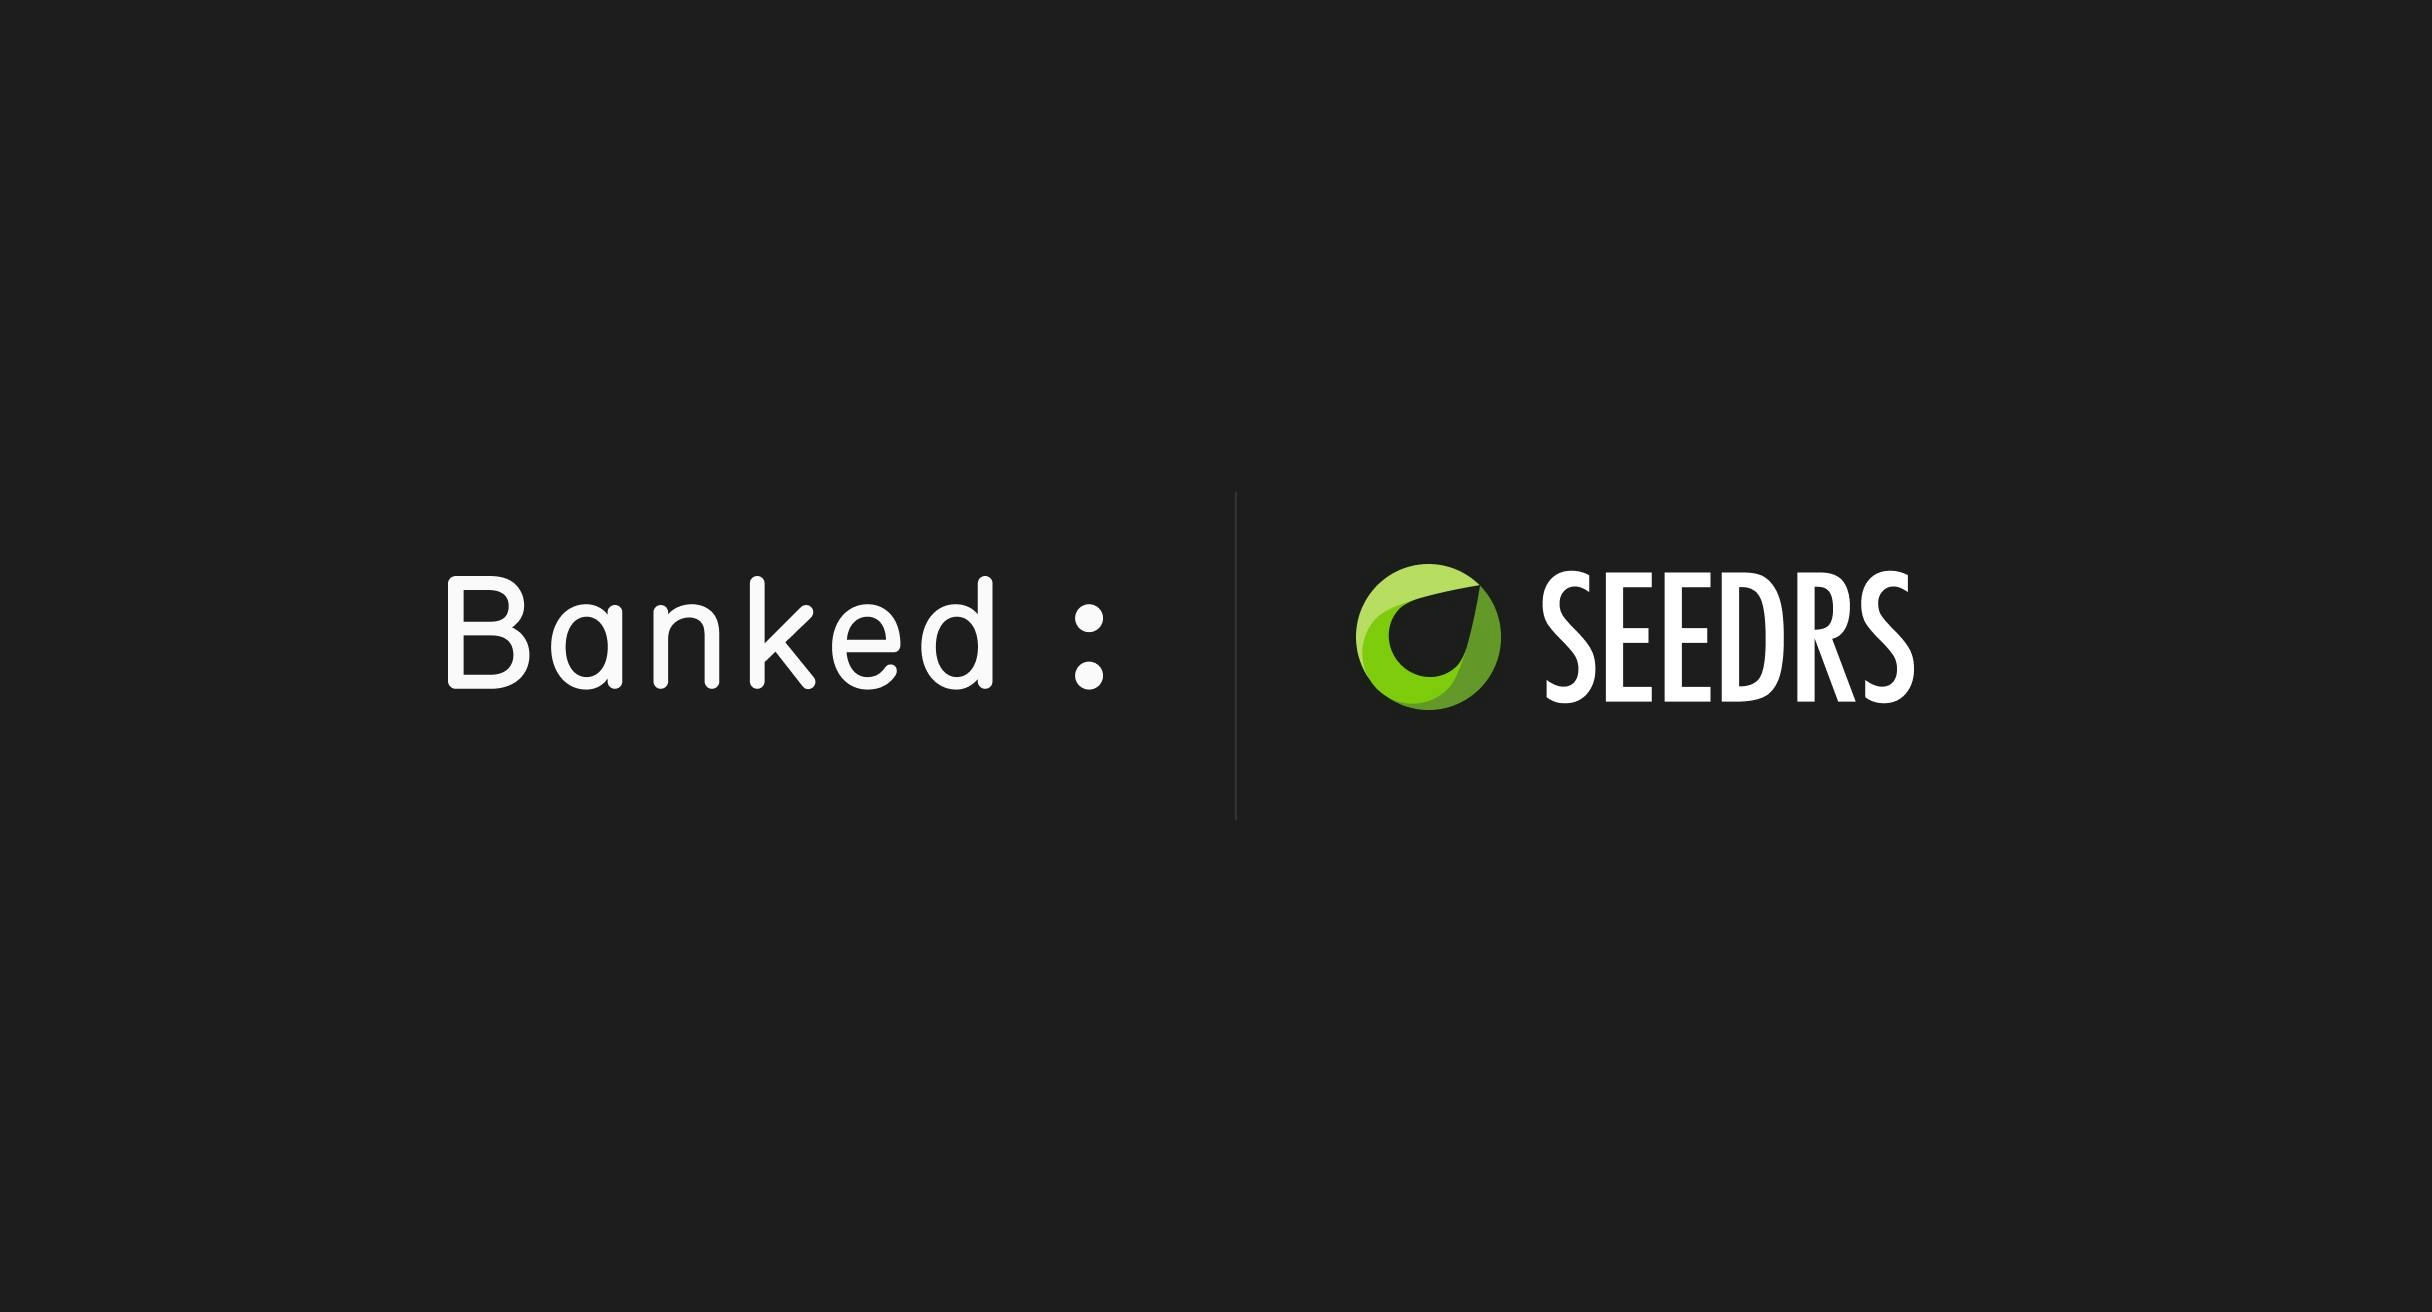 banked and seedrs logos in partnership